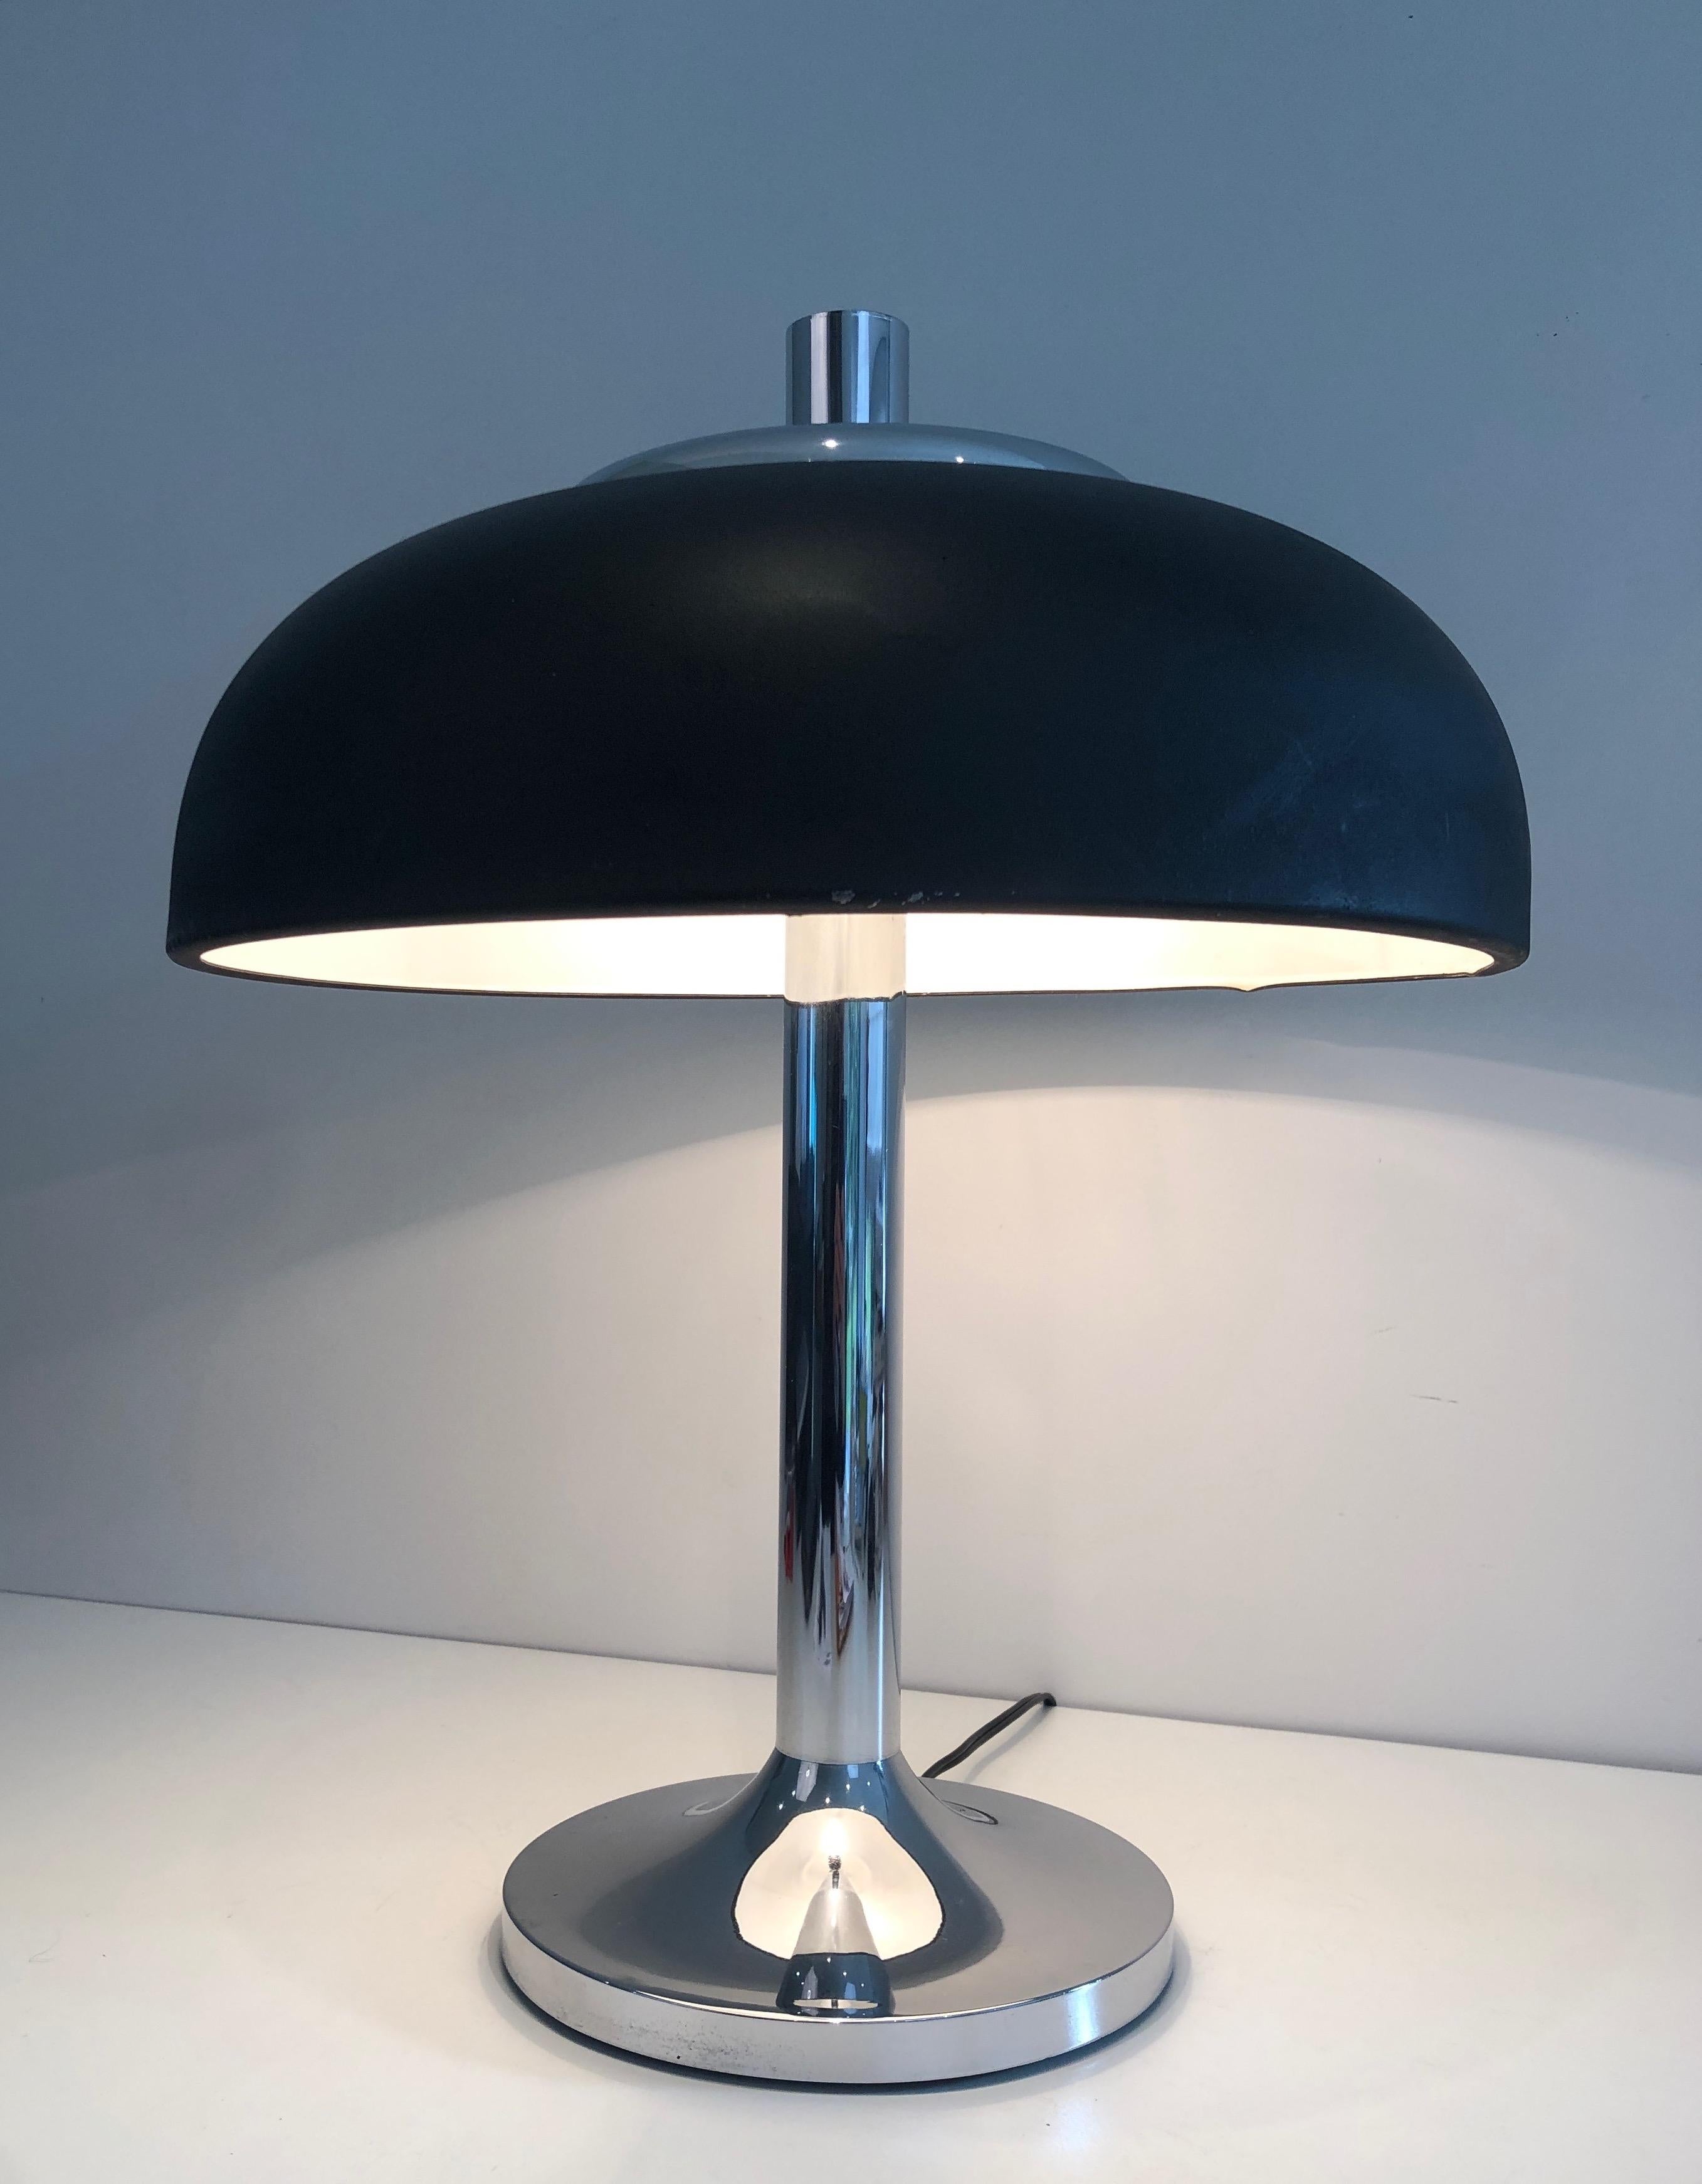 Large Chrome and Black Lacquered Design Table Lamp, French Work, circa 1950 For Sale 5